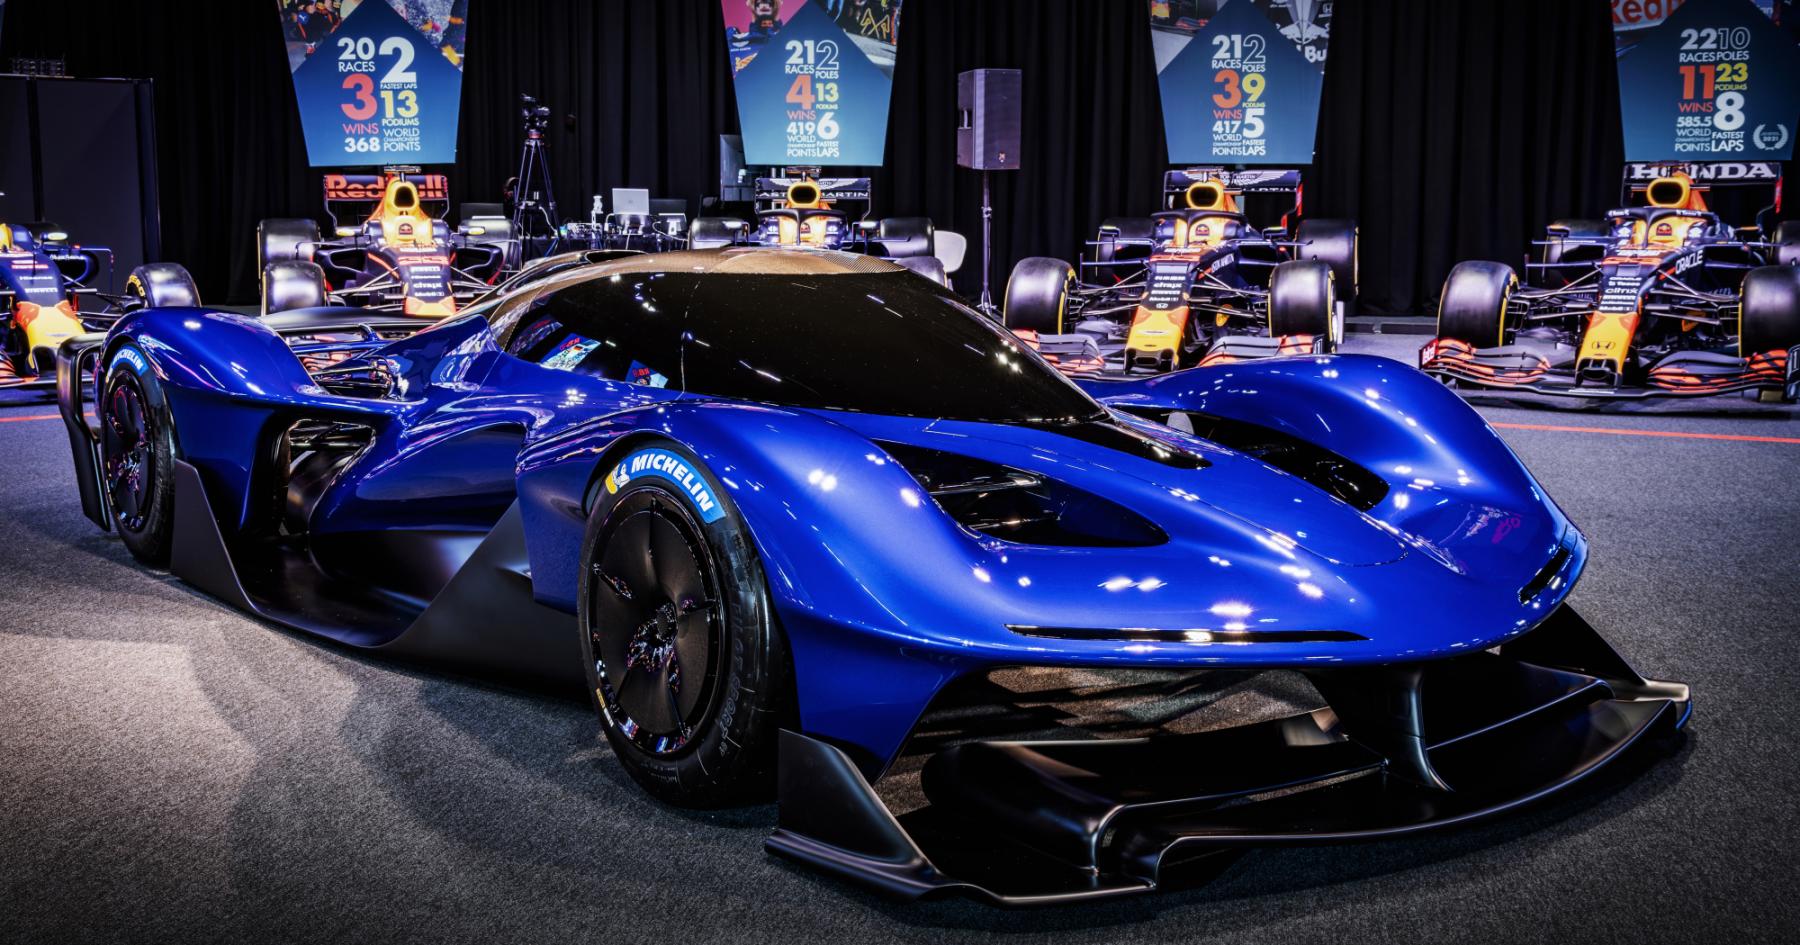 Red Bull's Groundbreaking Revelation: Unveiling An Astonishing and Emotionally Charged Hypercar